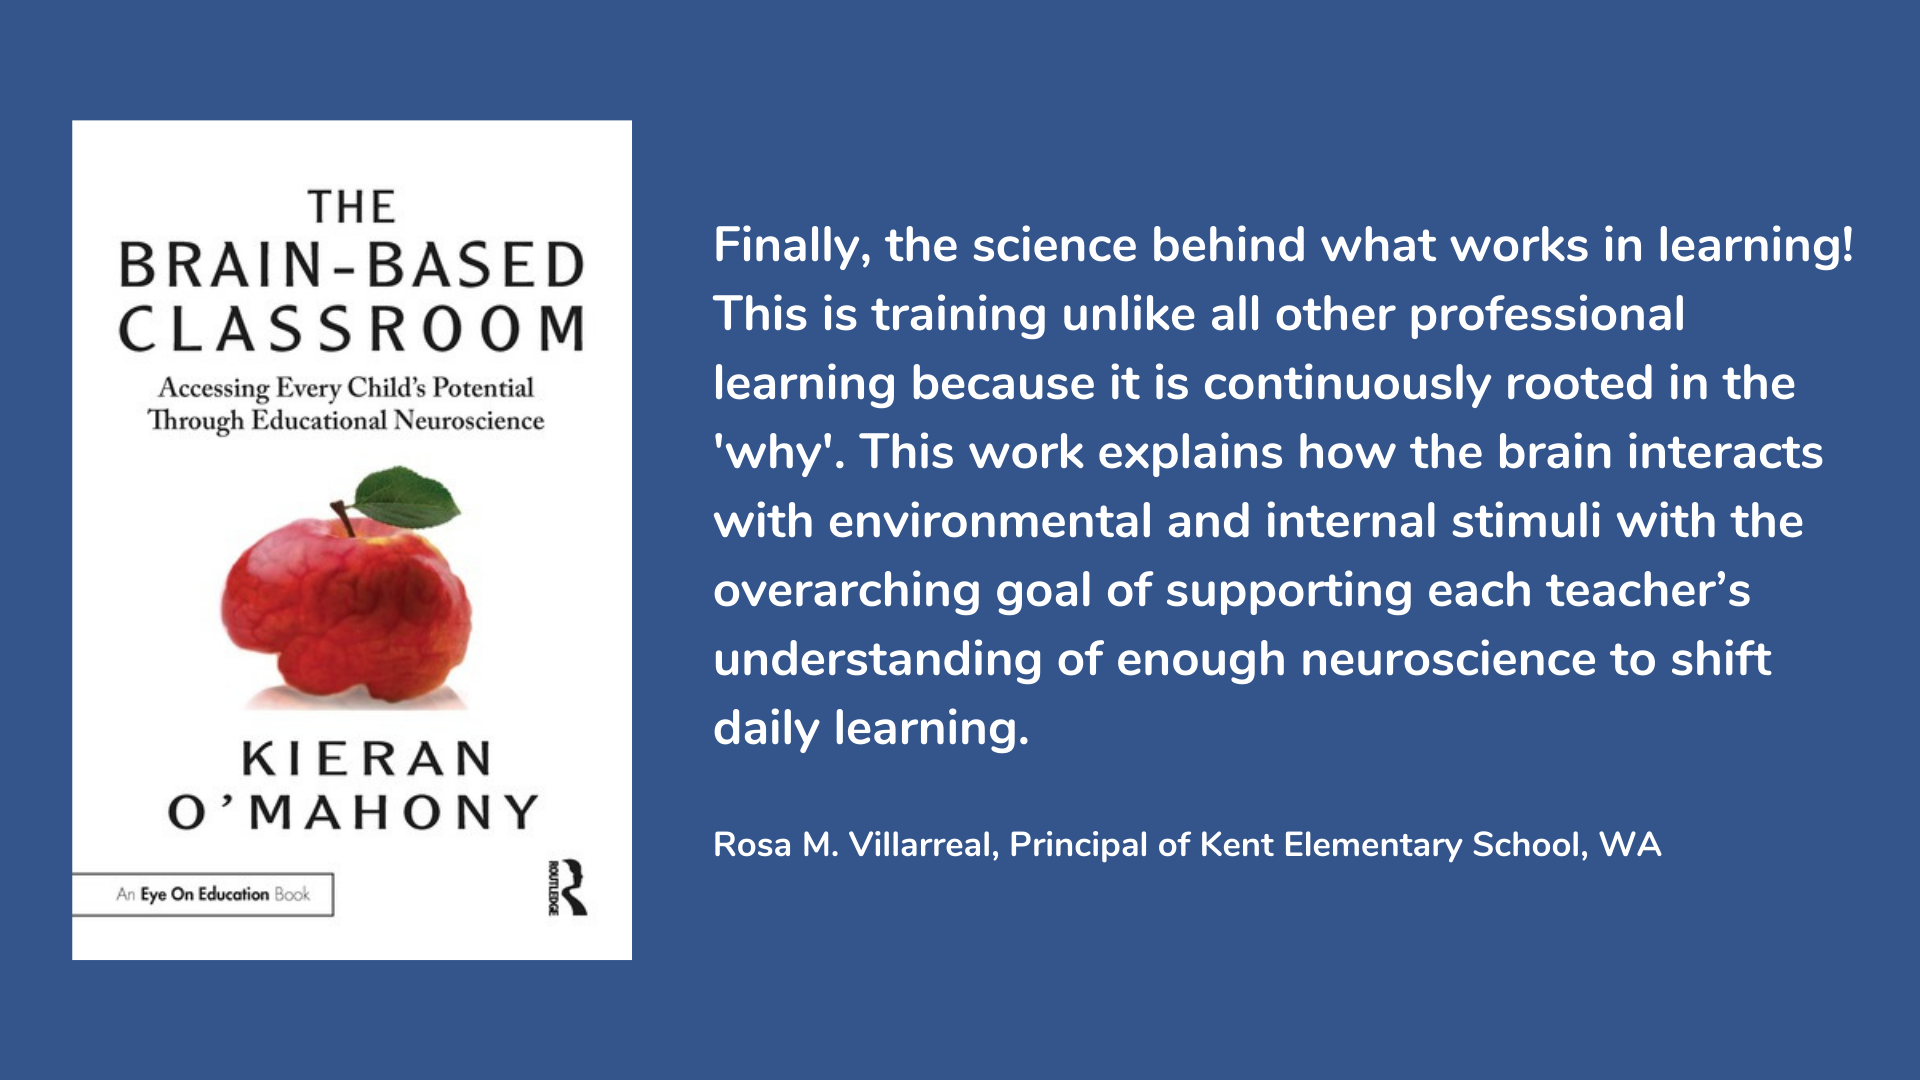 The Brain-Based Classroom: Accessing Every Child’s Potential Through Educational Neuroscience